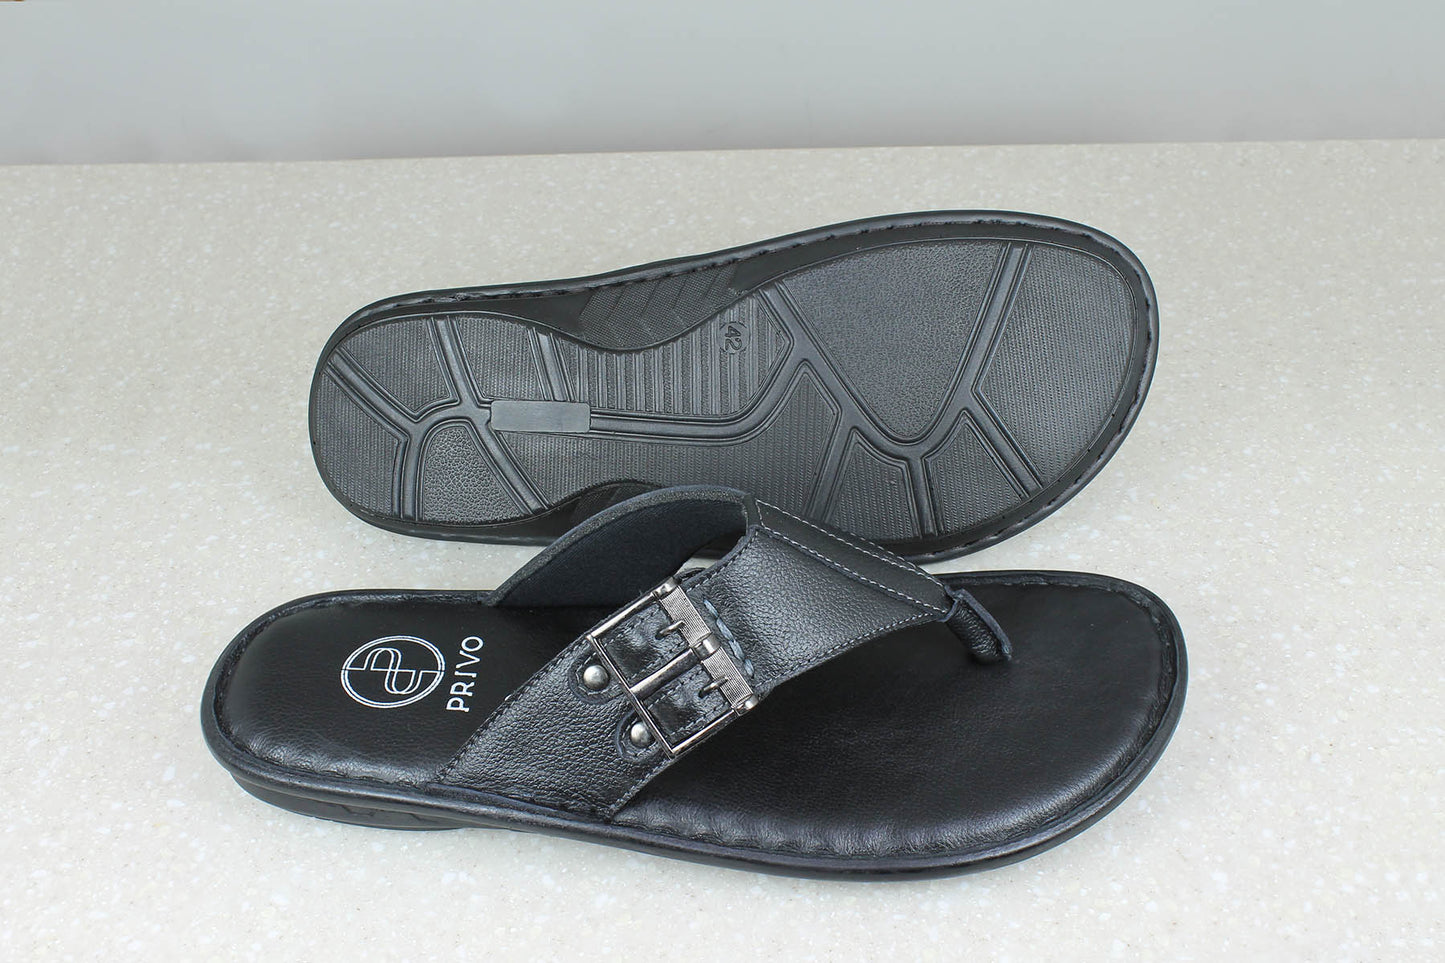 THONG SLIPPERS-BLACK-Men's Slippers-Inc5 Shoes